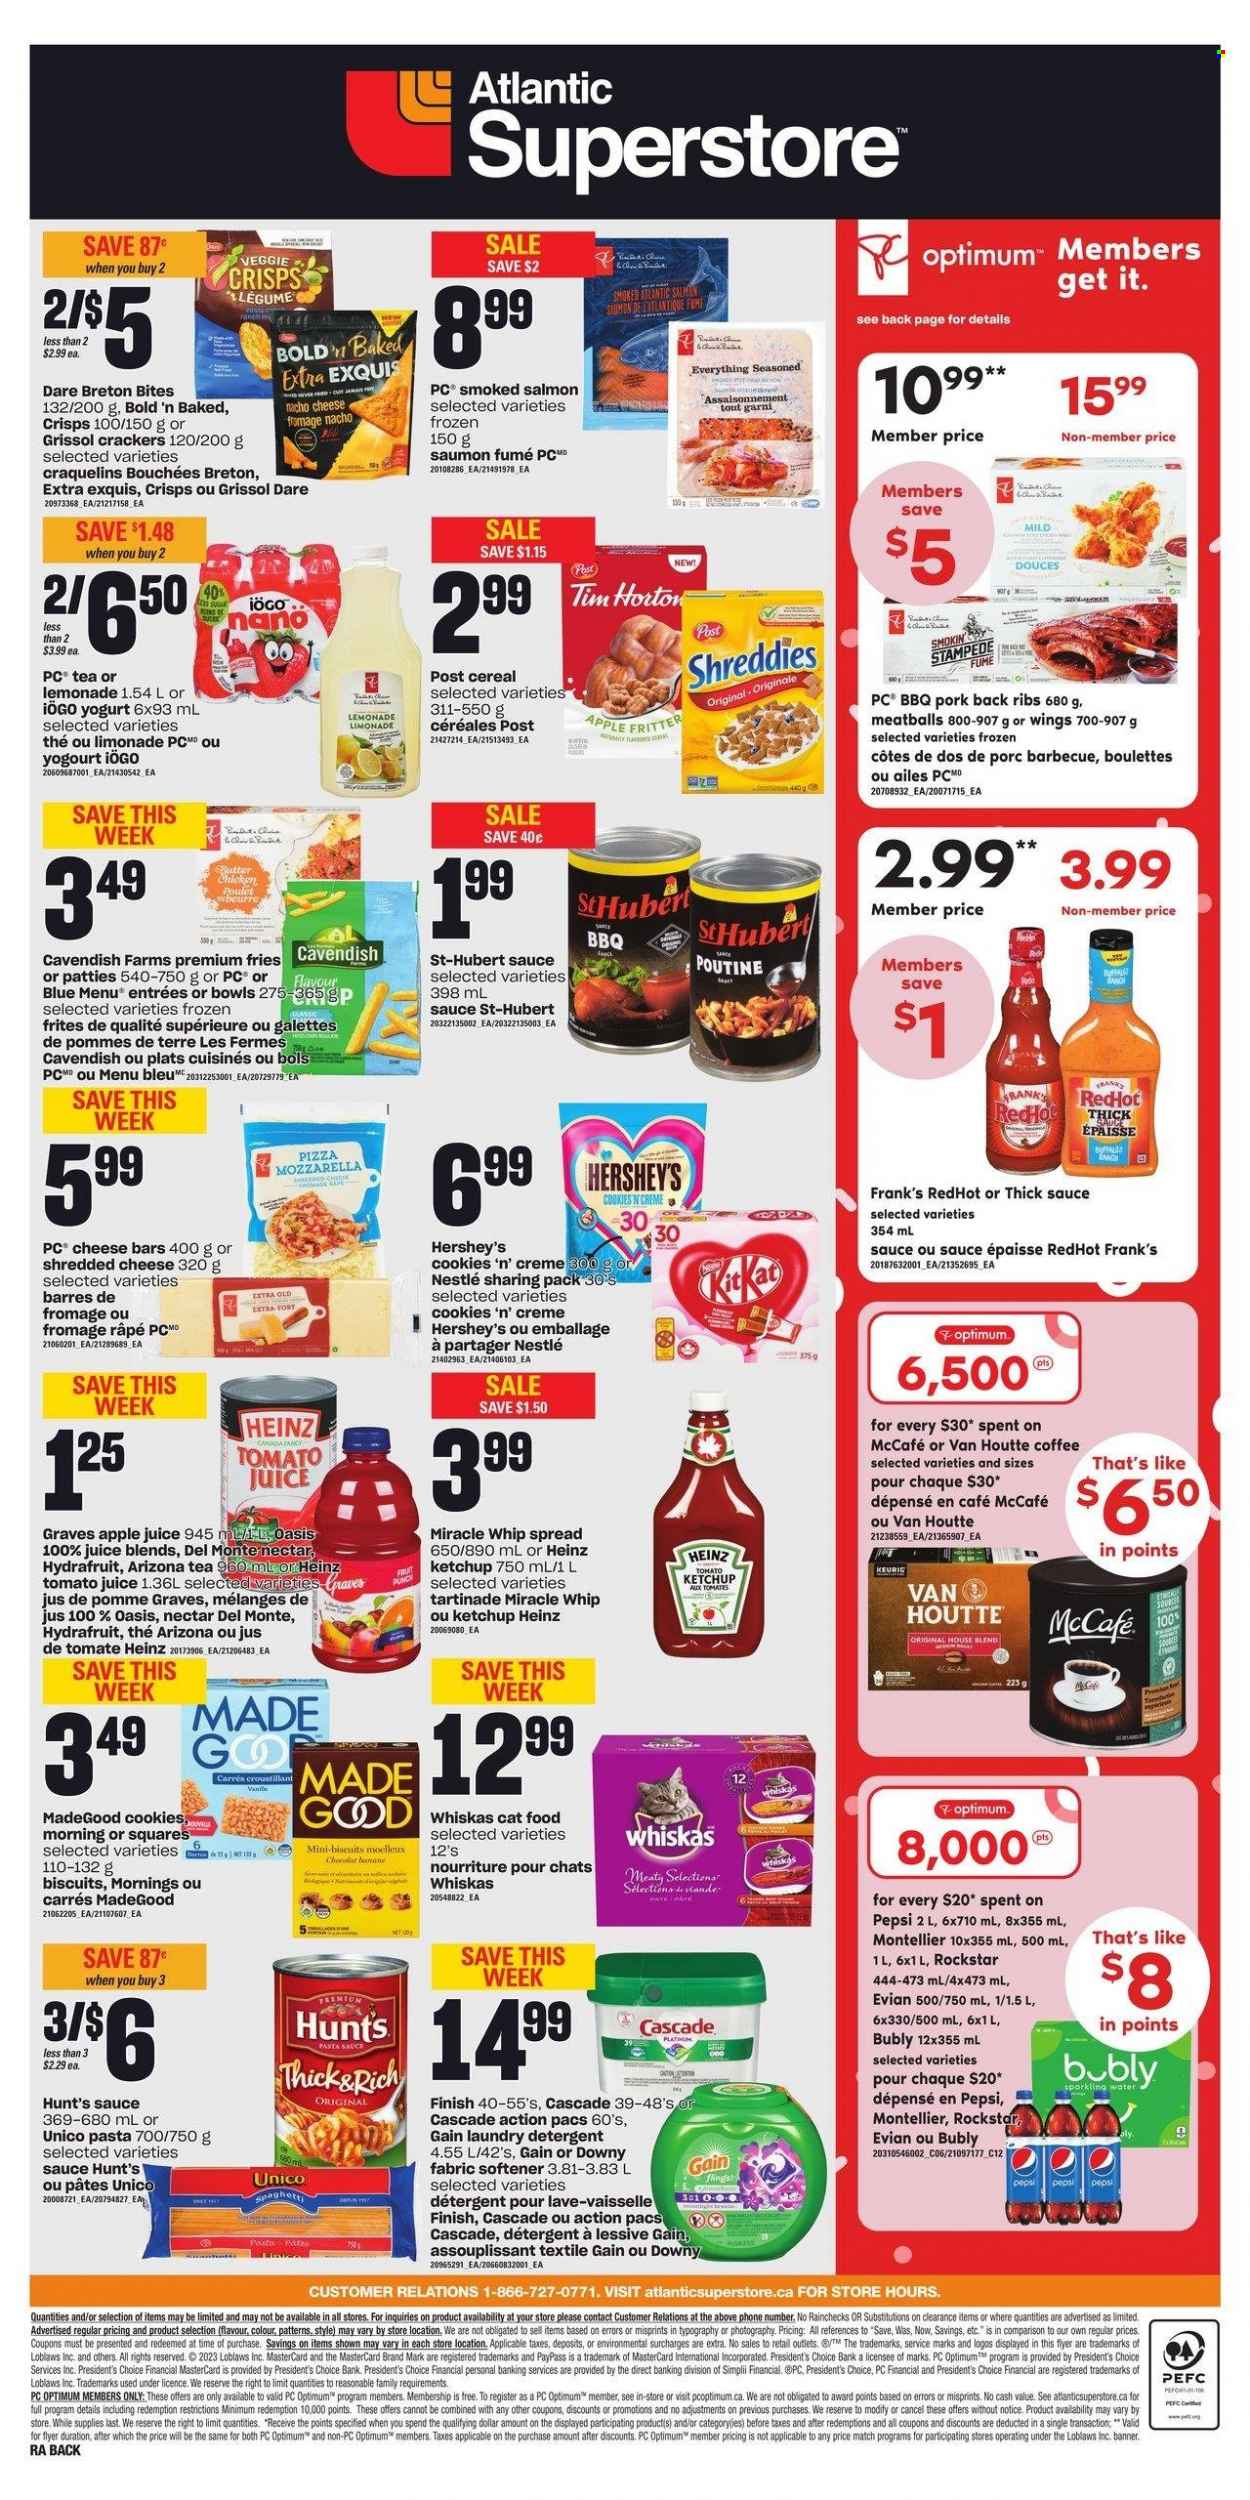 thumbnail - Atlantic Superstore Flyer - January 26, 2023 - February 01, 2023 - Sales products - smoked salmon, pizza, meatballs, pasta, shredded cheese, yoghurt, Miracle Whip, Hershey's, potato fries, cookies, crackers, biscuit, Del Monte, cereals, apple juice, lemonade, tomato juice, Pepsi, juice, AriZona, Rockstar, sparkling water, Evian, tea, coffee, McCafe, ribs, pork meat, pork ribs, pork back ribs, Gain, fabric softener, laundry detergent, Cascade, Downy Laundry, animal food, cat food, Optimum, detergent, Nestlé, Heinz, ketchup, Whiskas. Page 2.